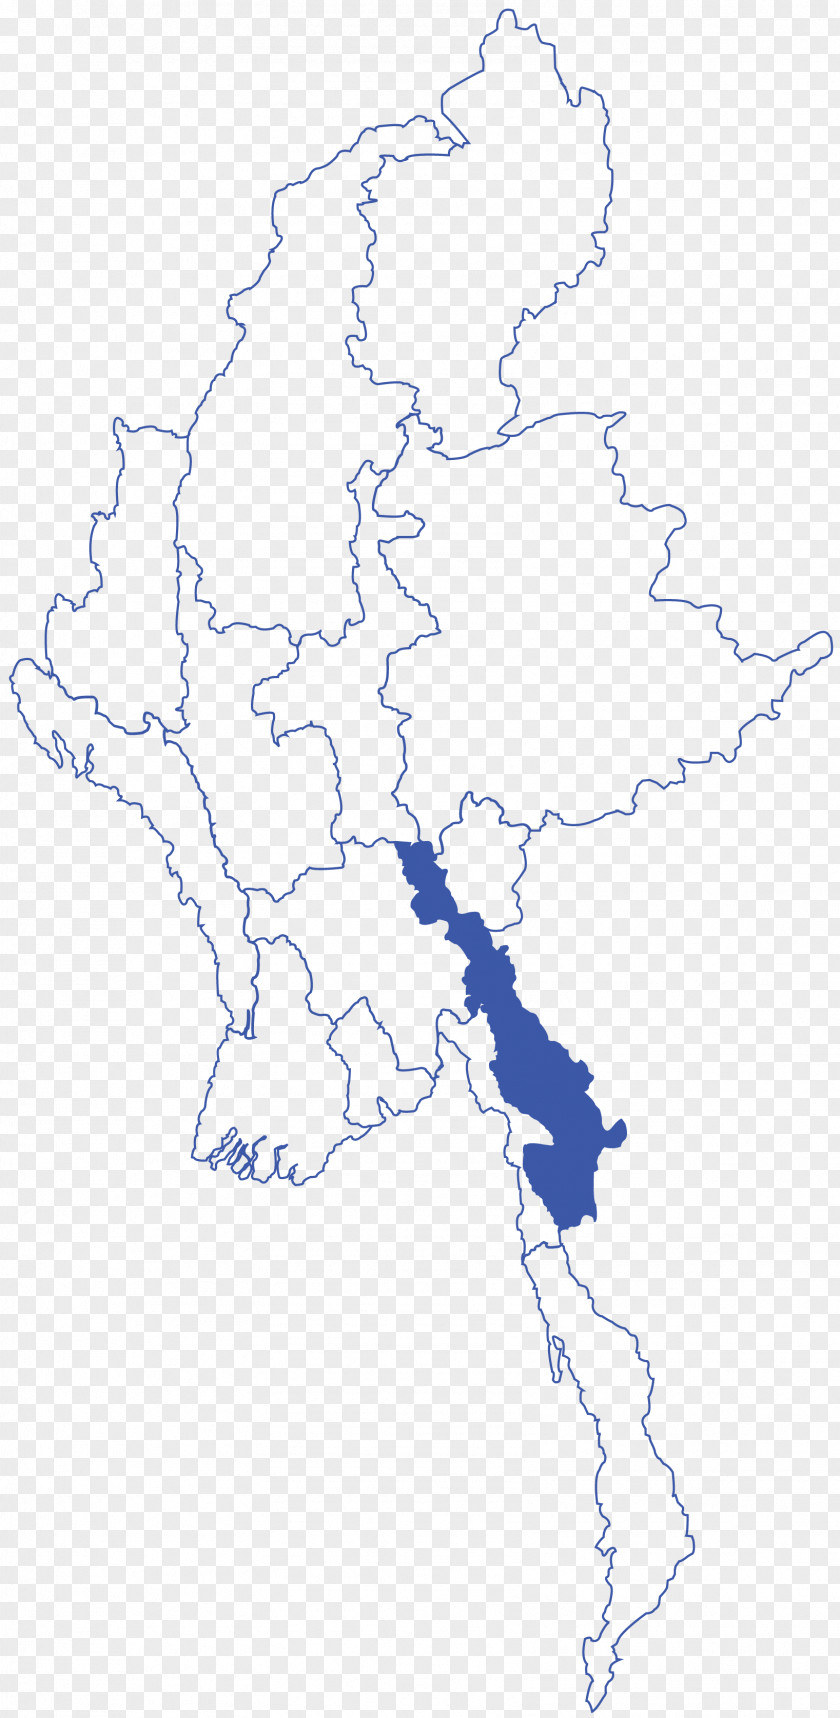 All Myanmar Administrative Divisions Of Hpa-An Loikaw Kayah State Jurisdiction PNG